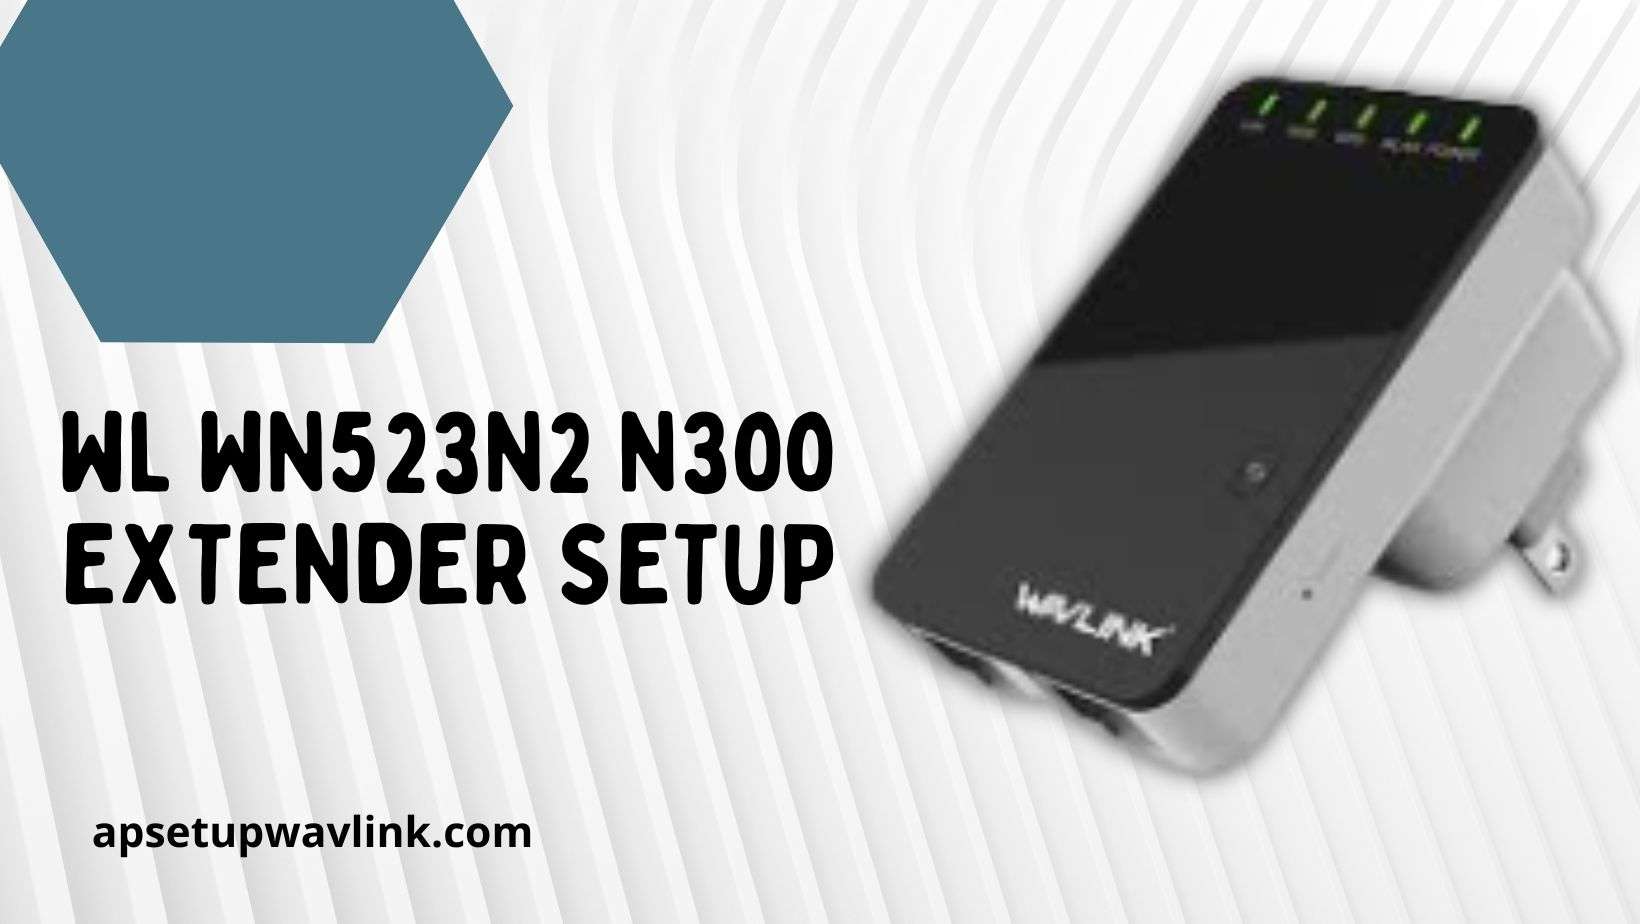 You are currently viewing WL WN523N2 N300 Extender Setup